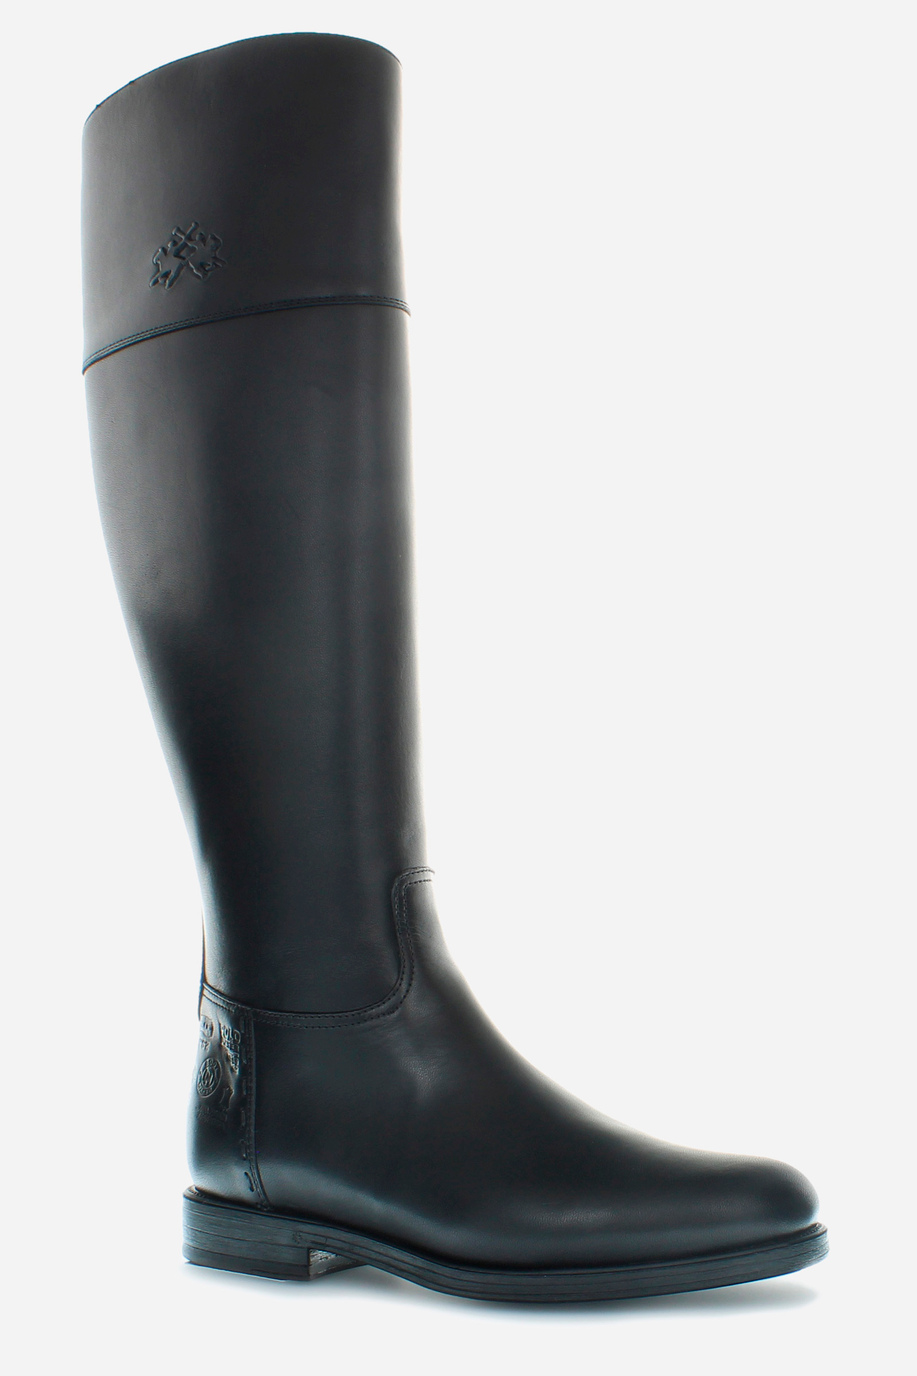 Women’s equestrian style leather boot - Business Looks Women | La Martina - Official Online Shop